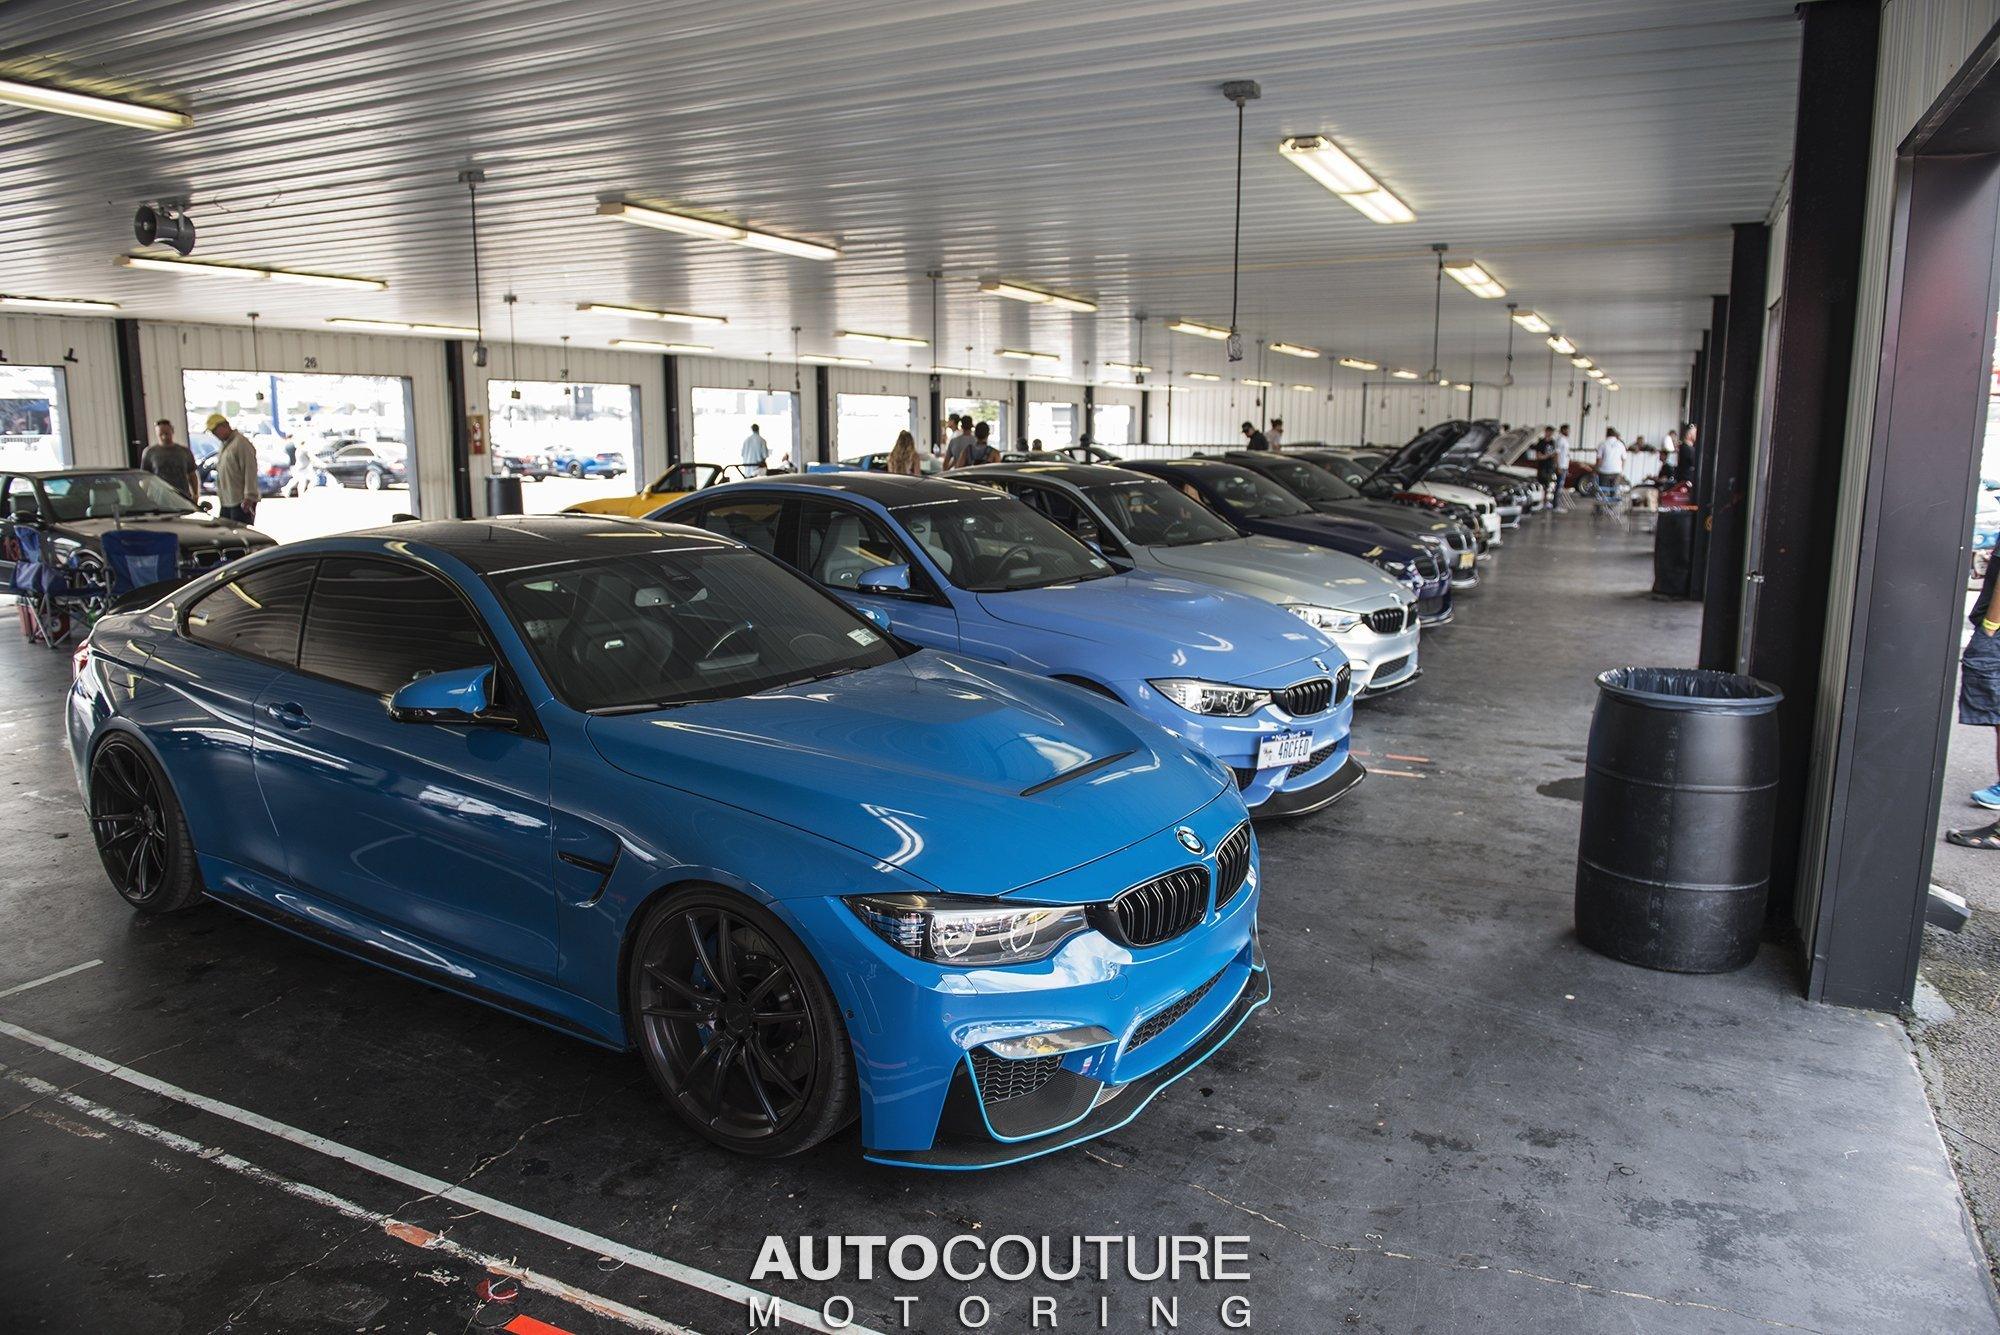 BMW  Autocouture Motoring – Tagged F25 X3 – AUTOcouture Motoring